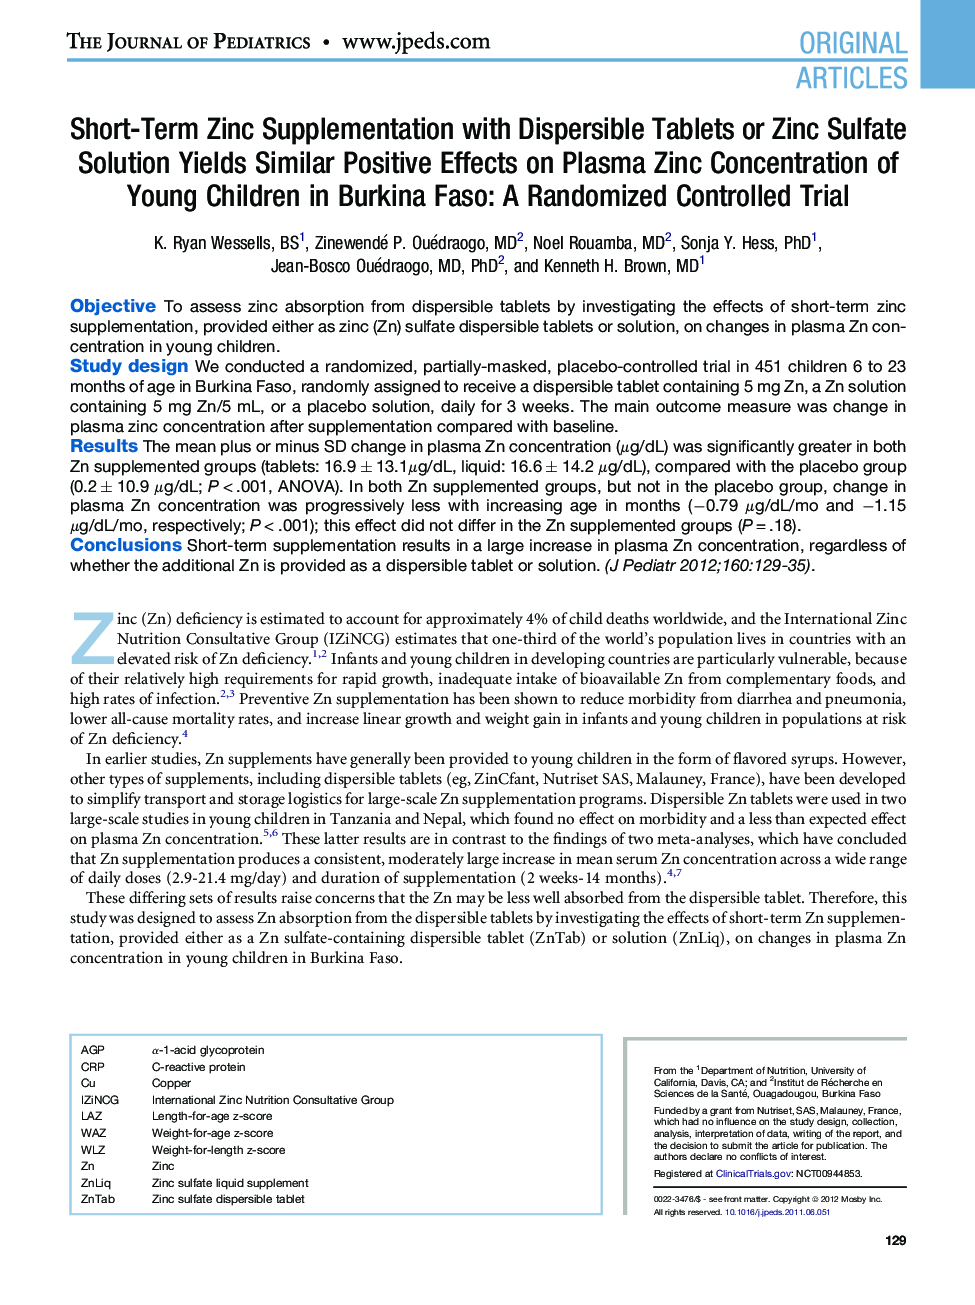 Short-Term Zinc Supplementation with Dispersible Tablets or Zinc Sulfate Solution Yields Similar Positive Effects on Plasma Zinc Concentration of Young Children in Burkina Faso: A Randomized Controlled Trial